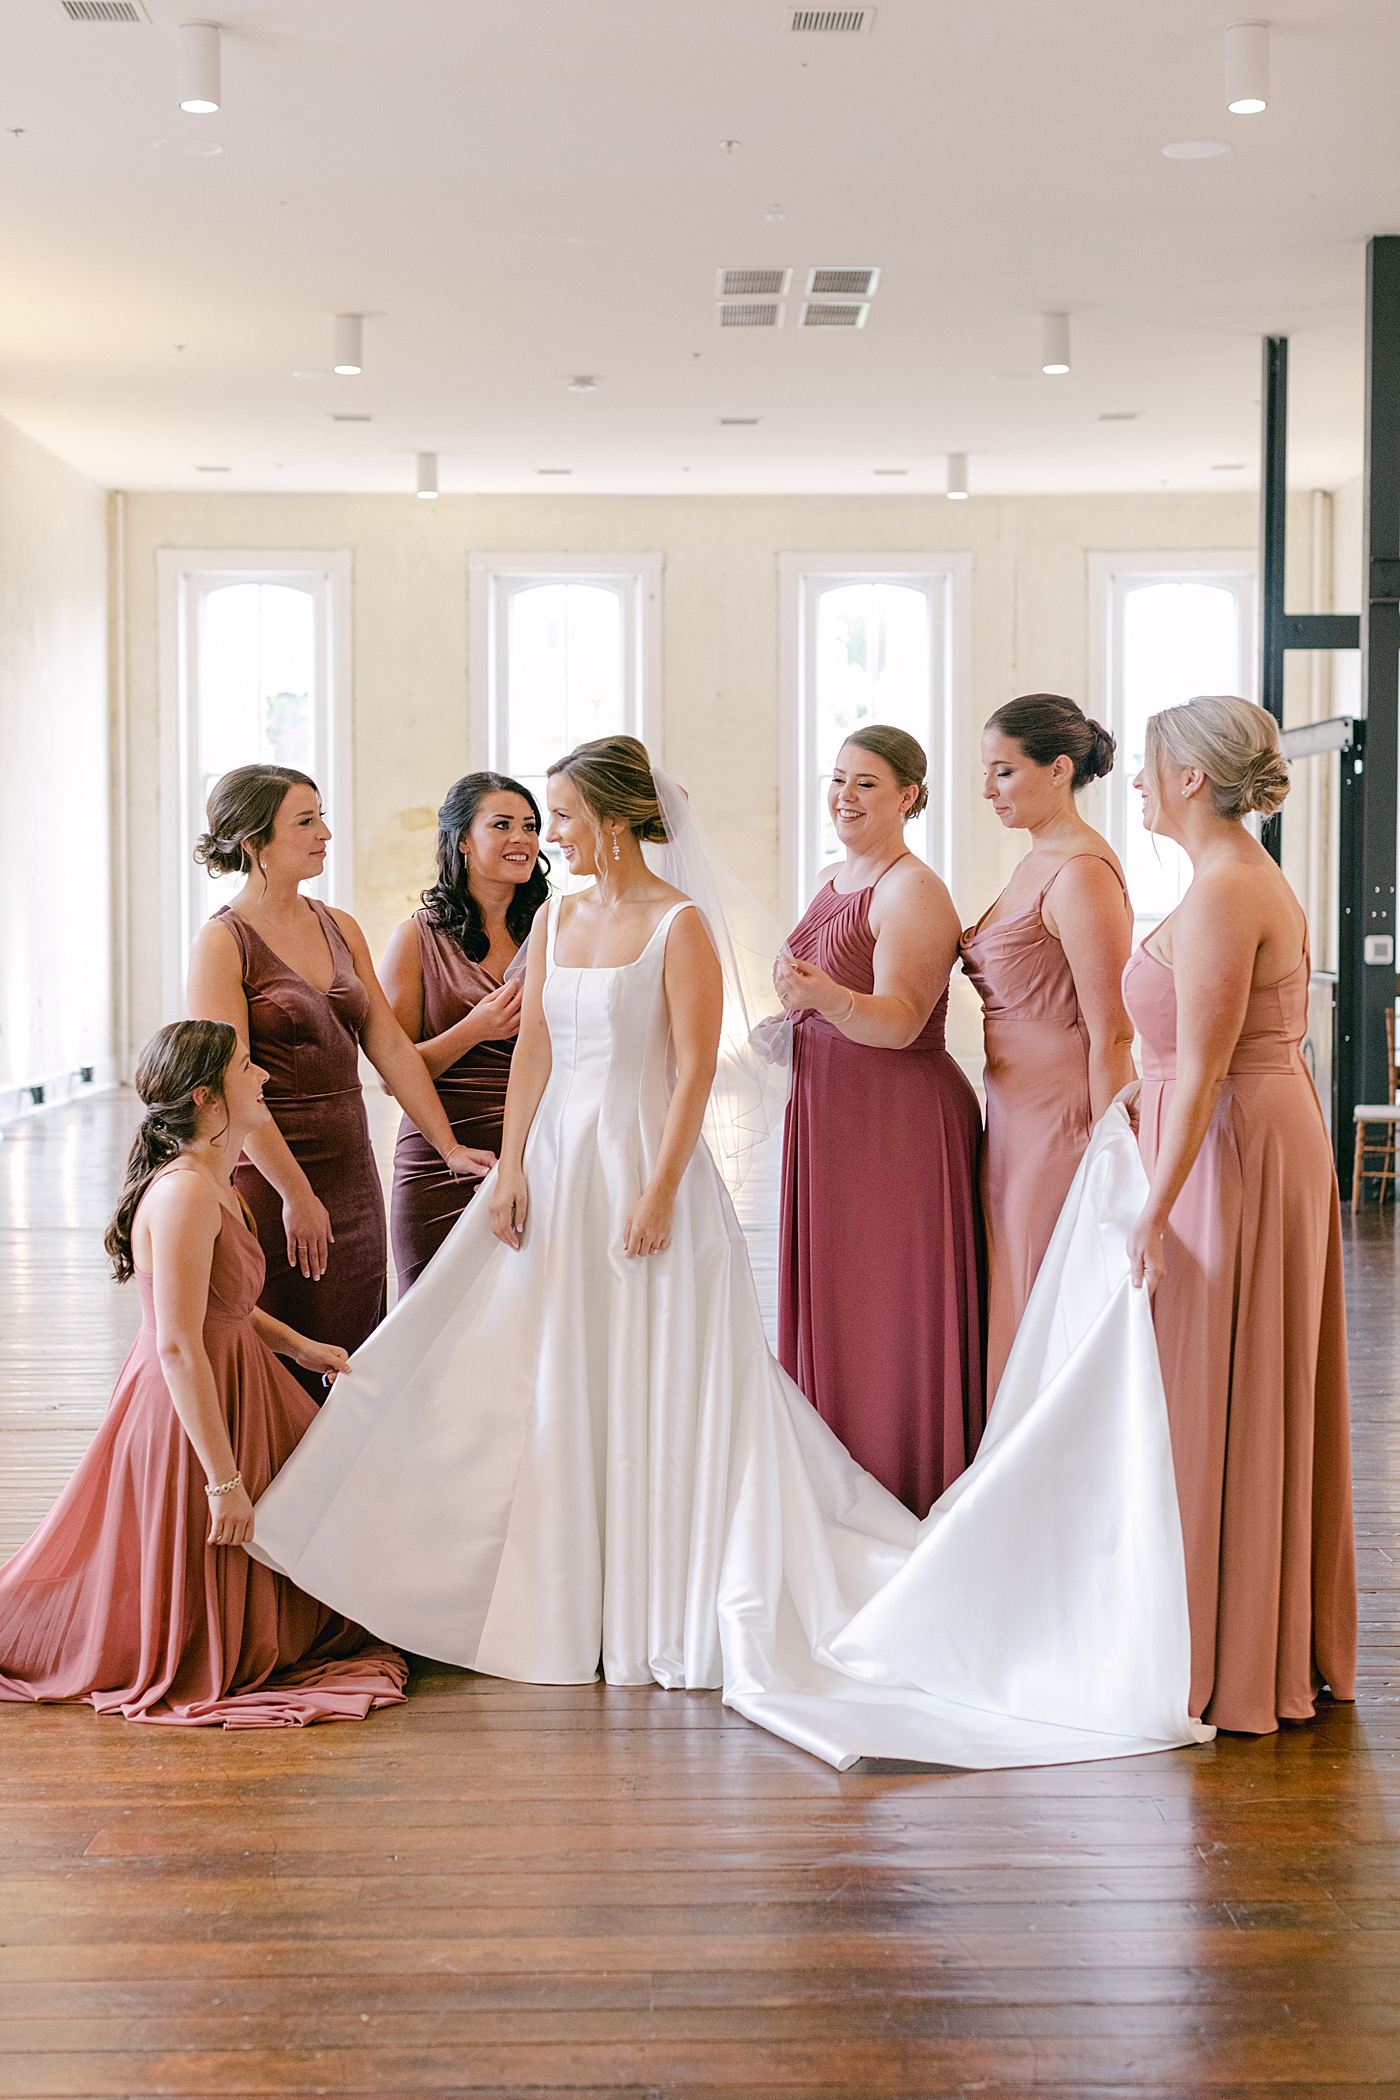 Bridesmaids helping bride with her dress | Photo by Hope Helmuth Photography